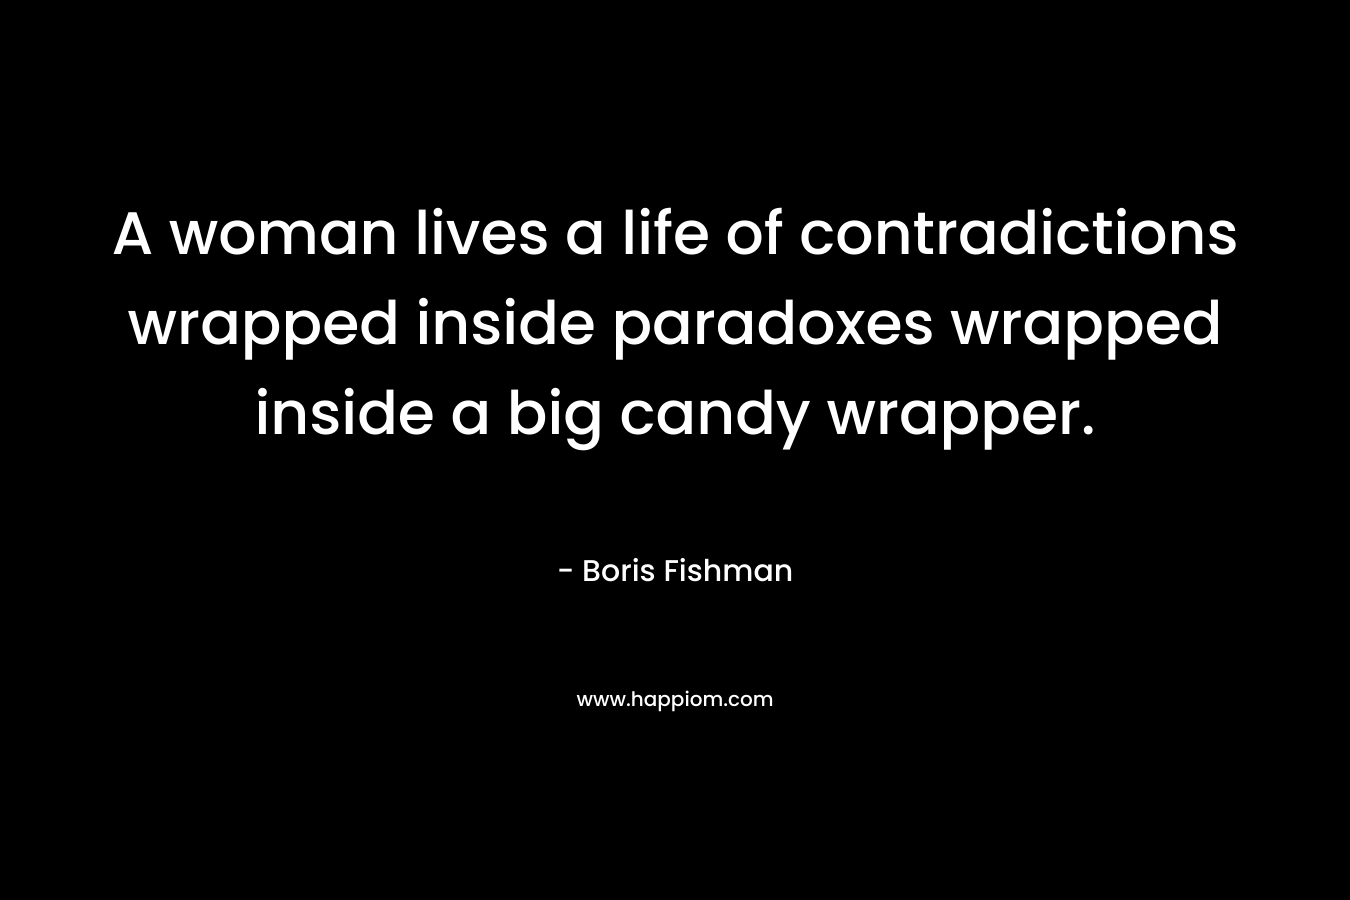 A woman lives a life of contradictions wrapped inside paradoxes wrapped inside a big candy wrapper. – Boris Fishman